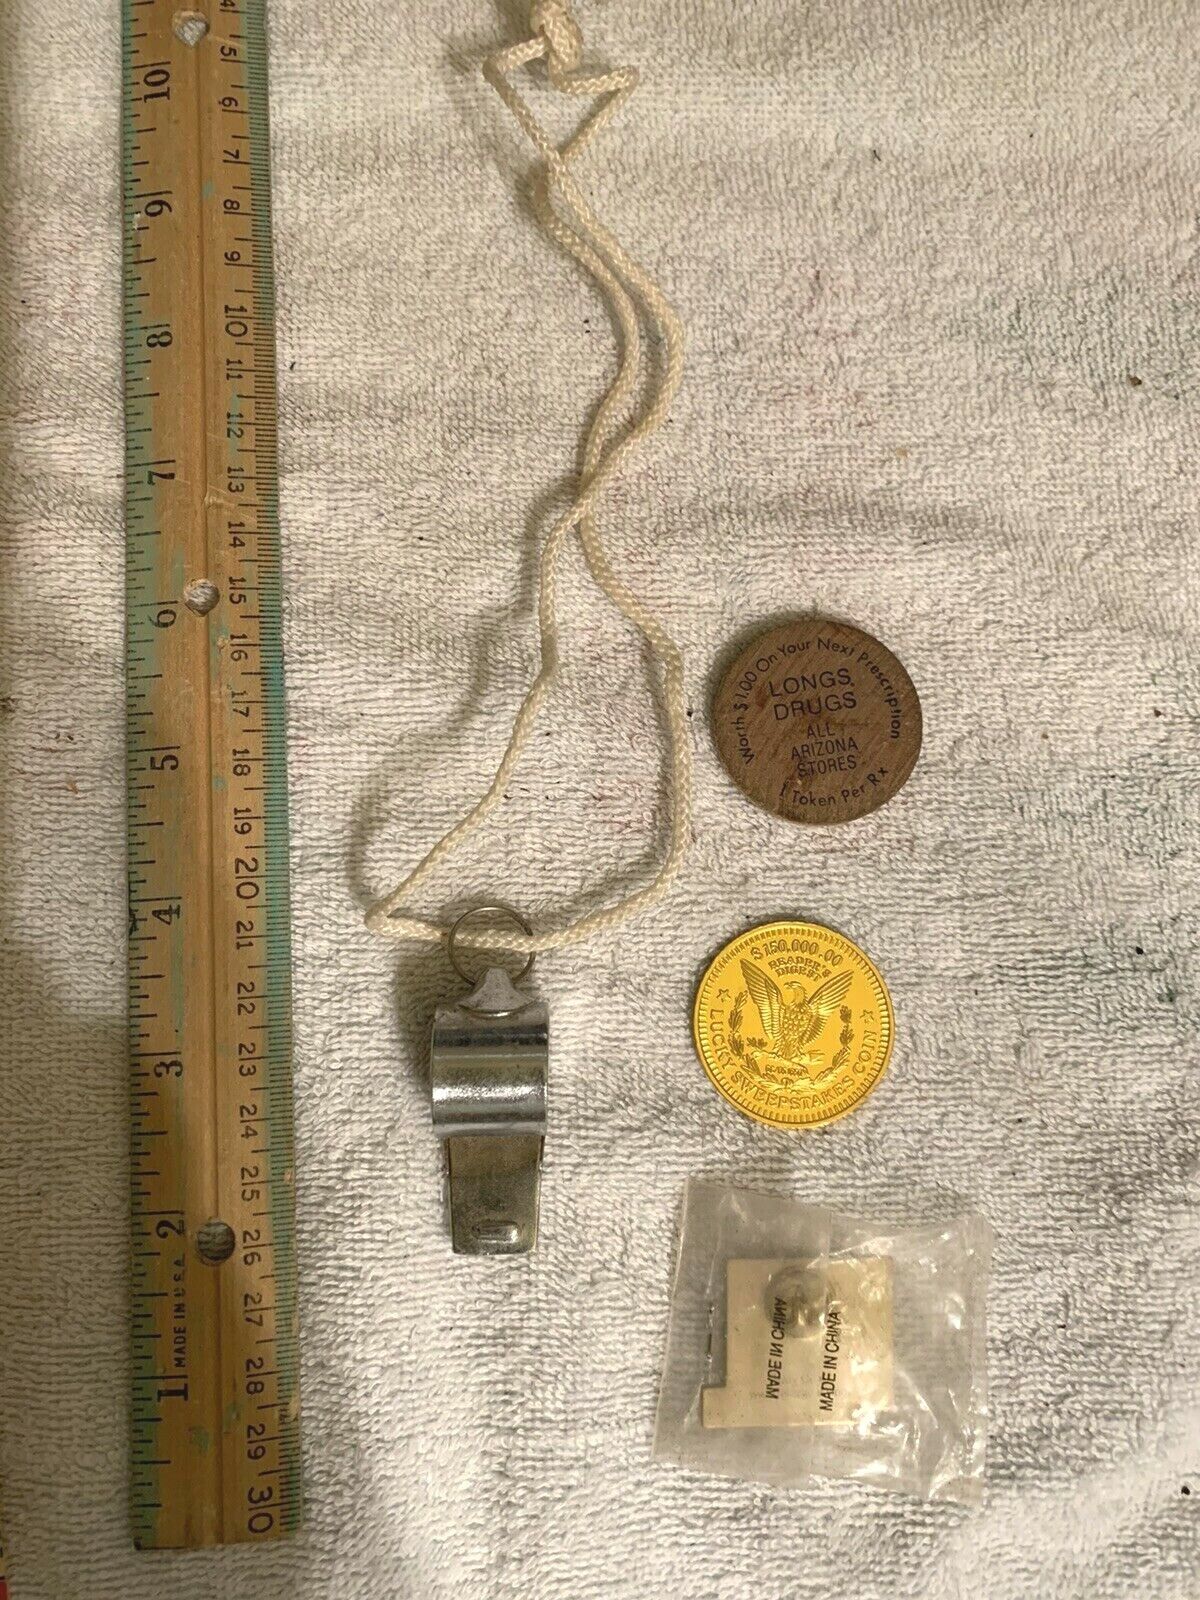 Whistle Readers Digest Coin Long’s Wooden Nickel And Caregiver Pin vintage 